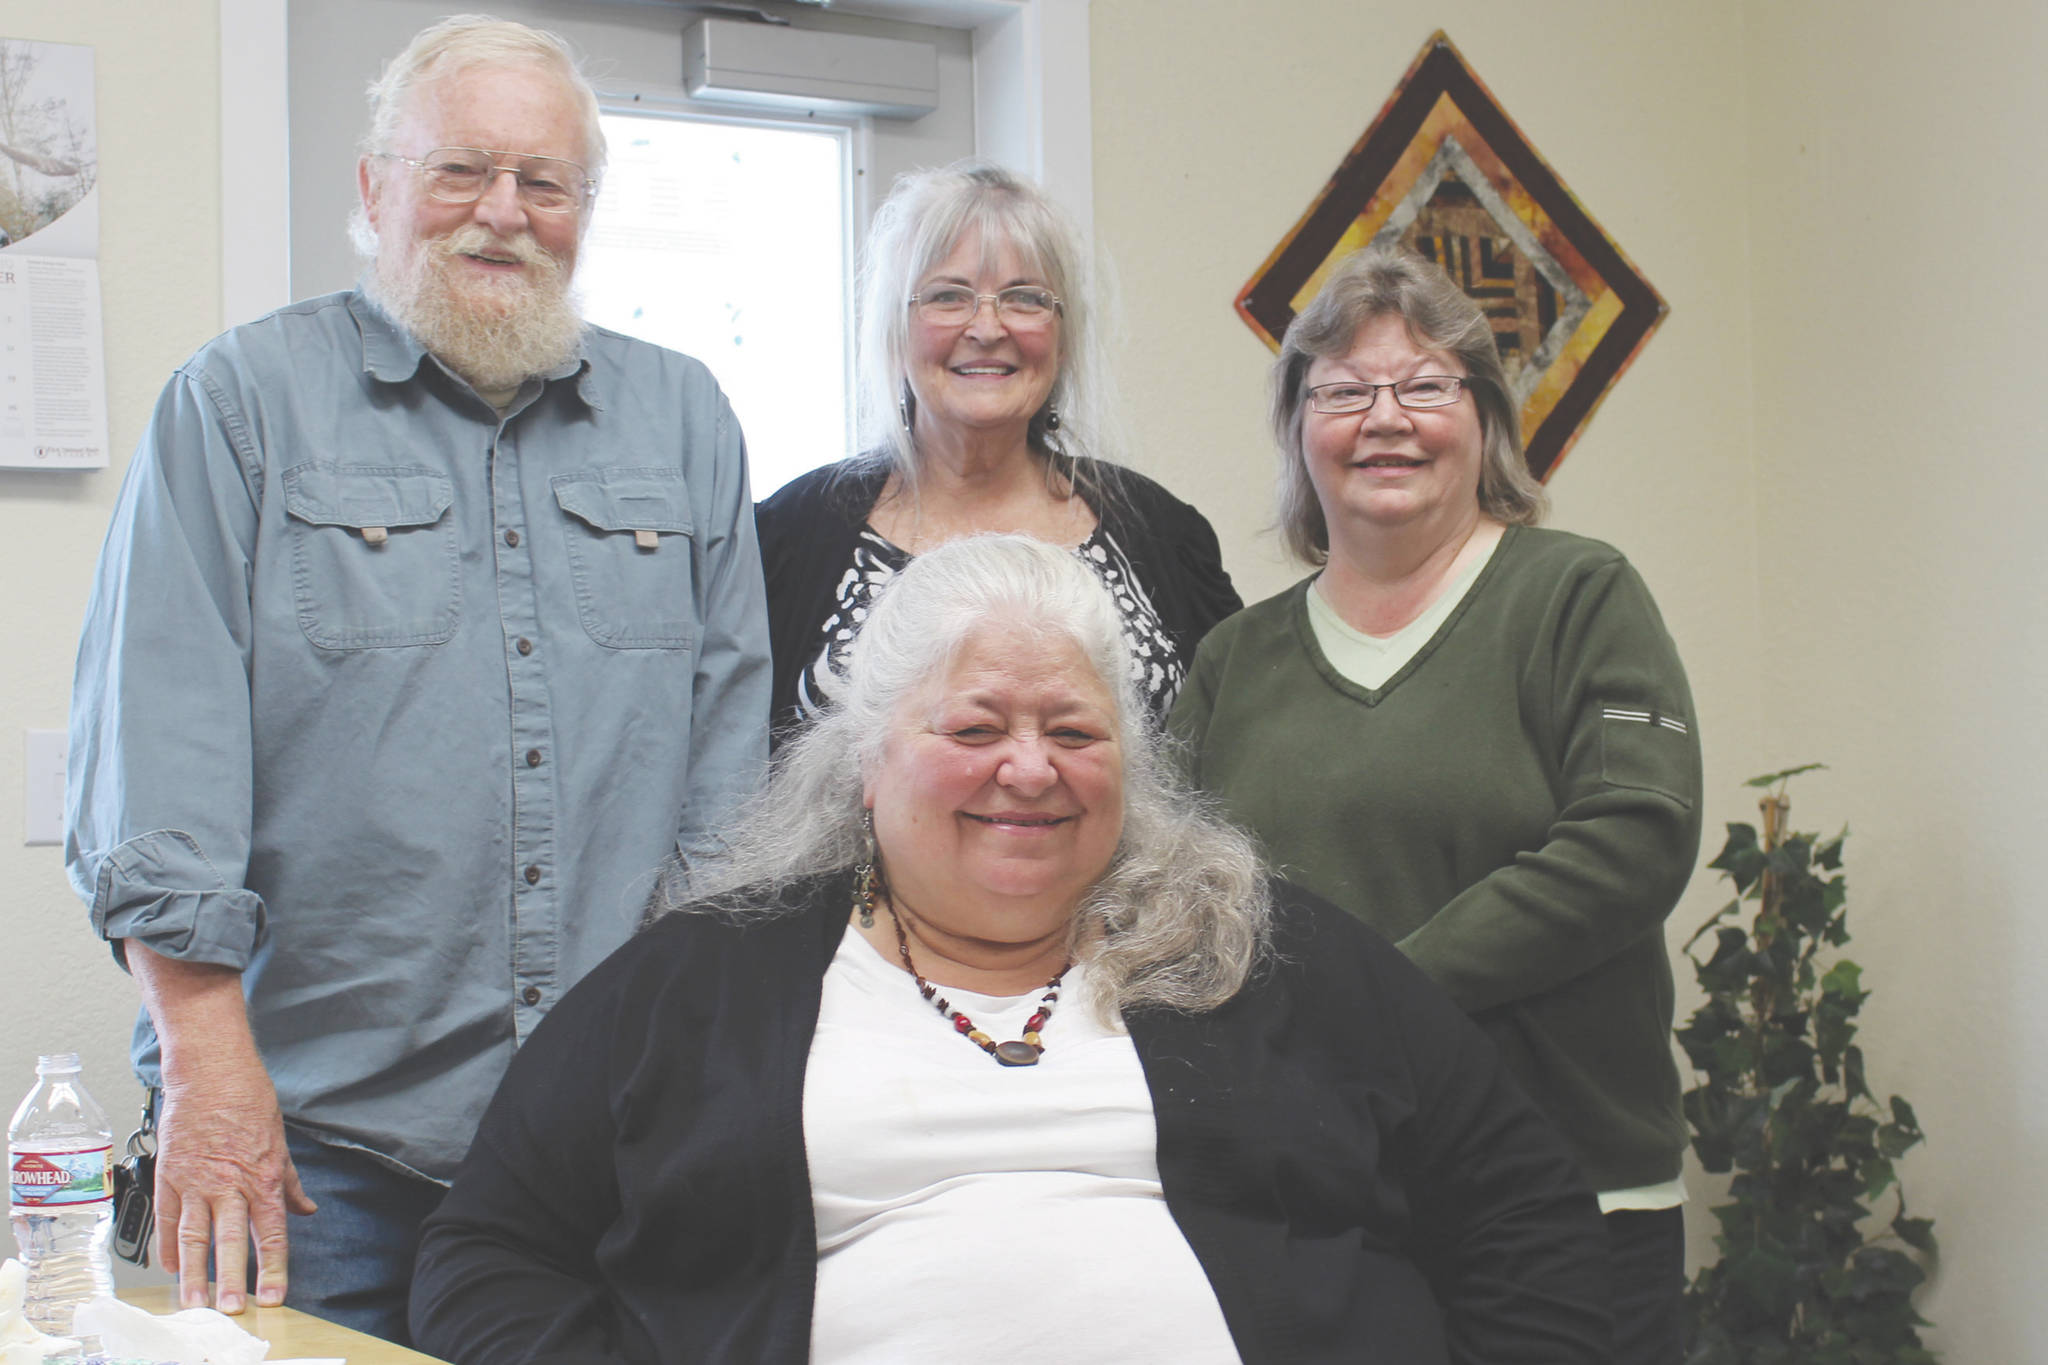 Grand Group members Joe Carlson, left, Nancy Carlson, front center, Sue Gill, back center and Vicki Fruichantie, right smile for the camera at the Children’s Advocacy Center in Kenai, Alaska on Oct. 3, 2019. (Photo by Brian Mazurek/Peninsula Clarion)